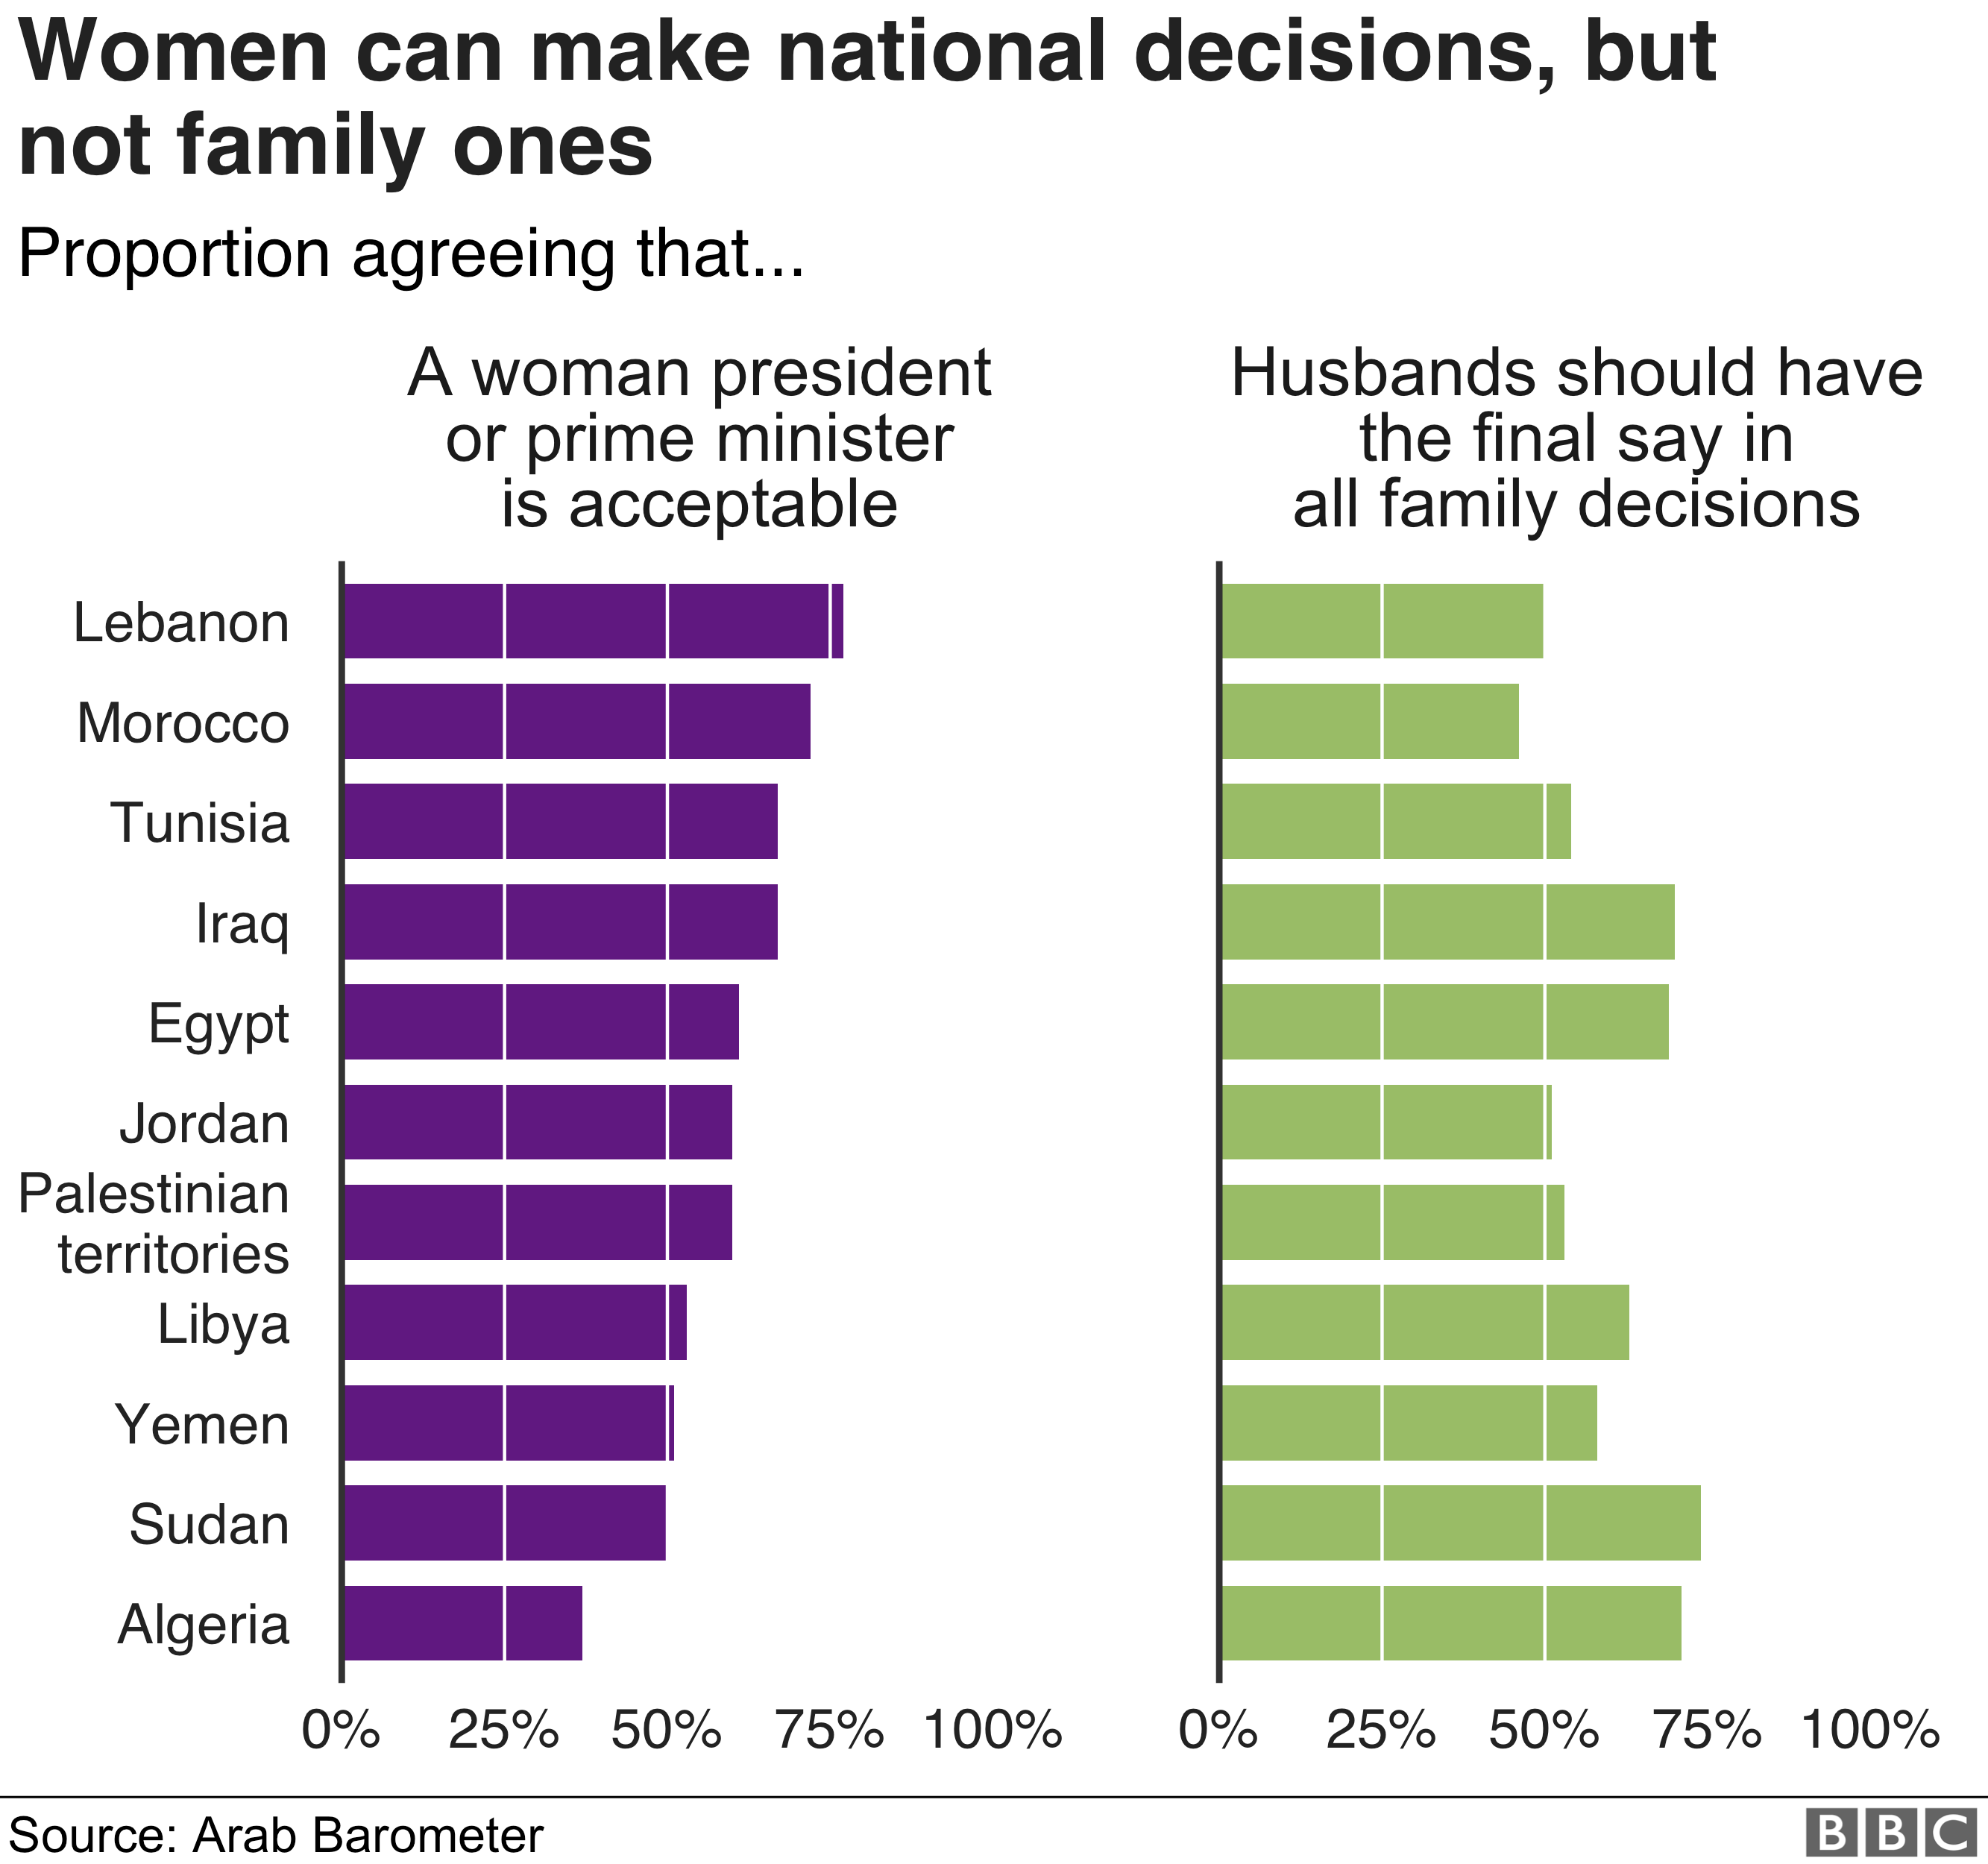 Chart showing that most people think a woman as prime minister is acceptable but think a husband should have the final say in family decisions